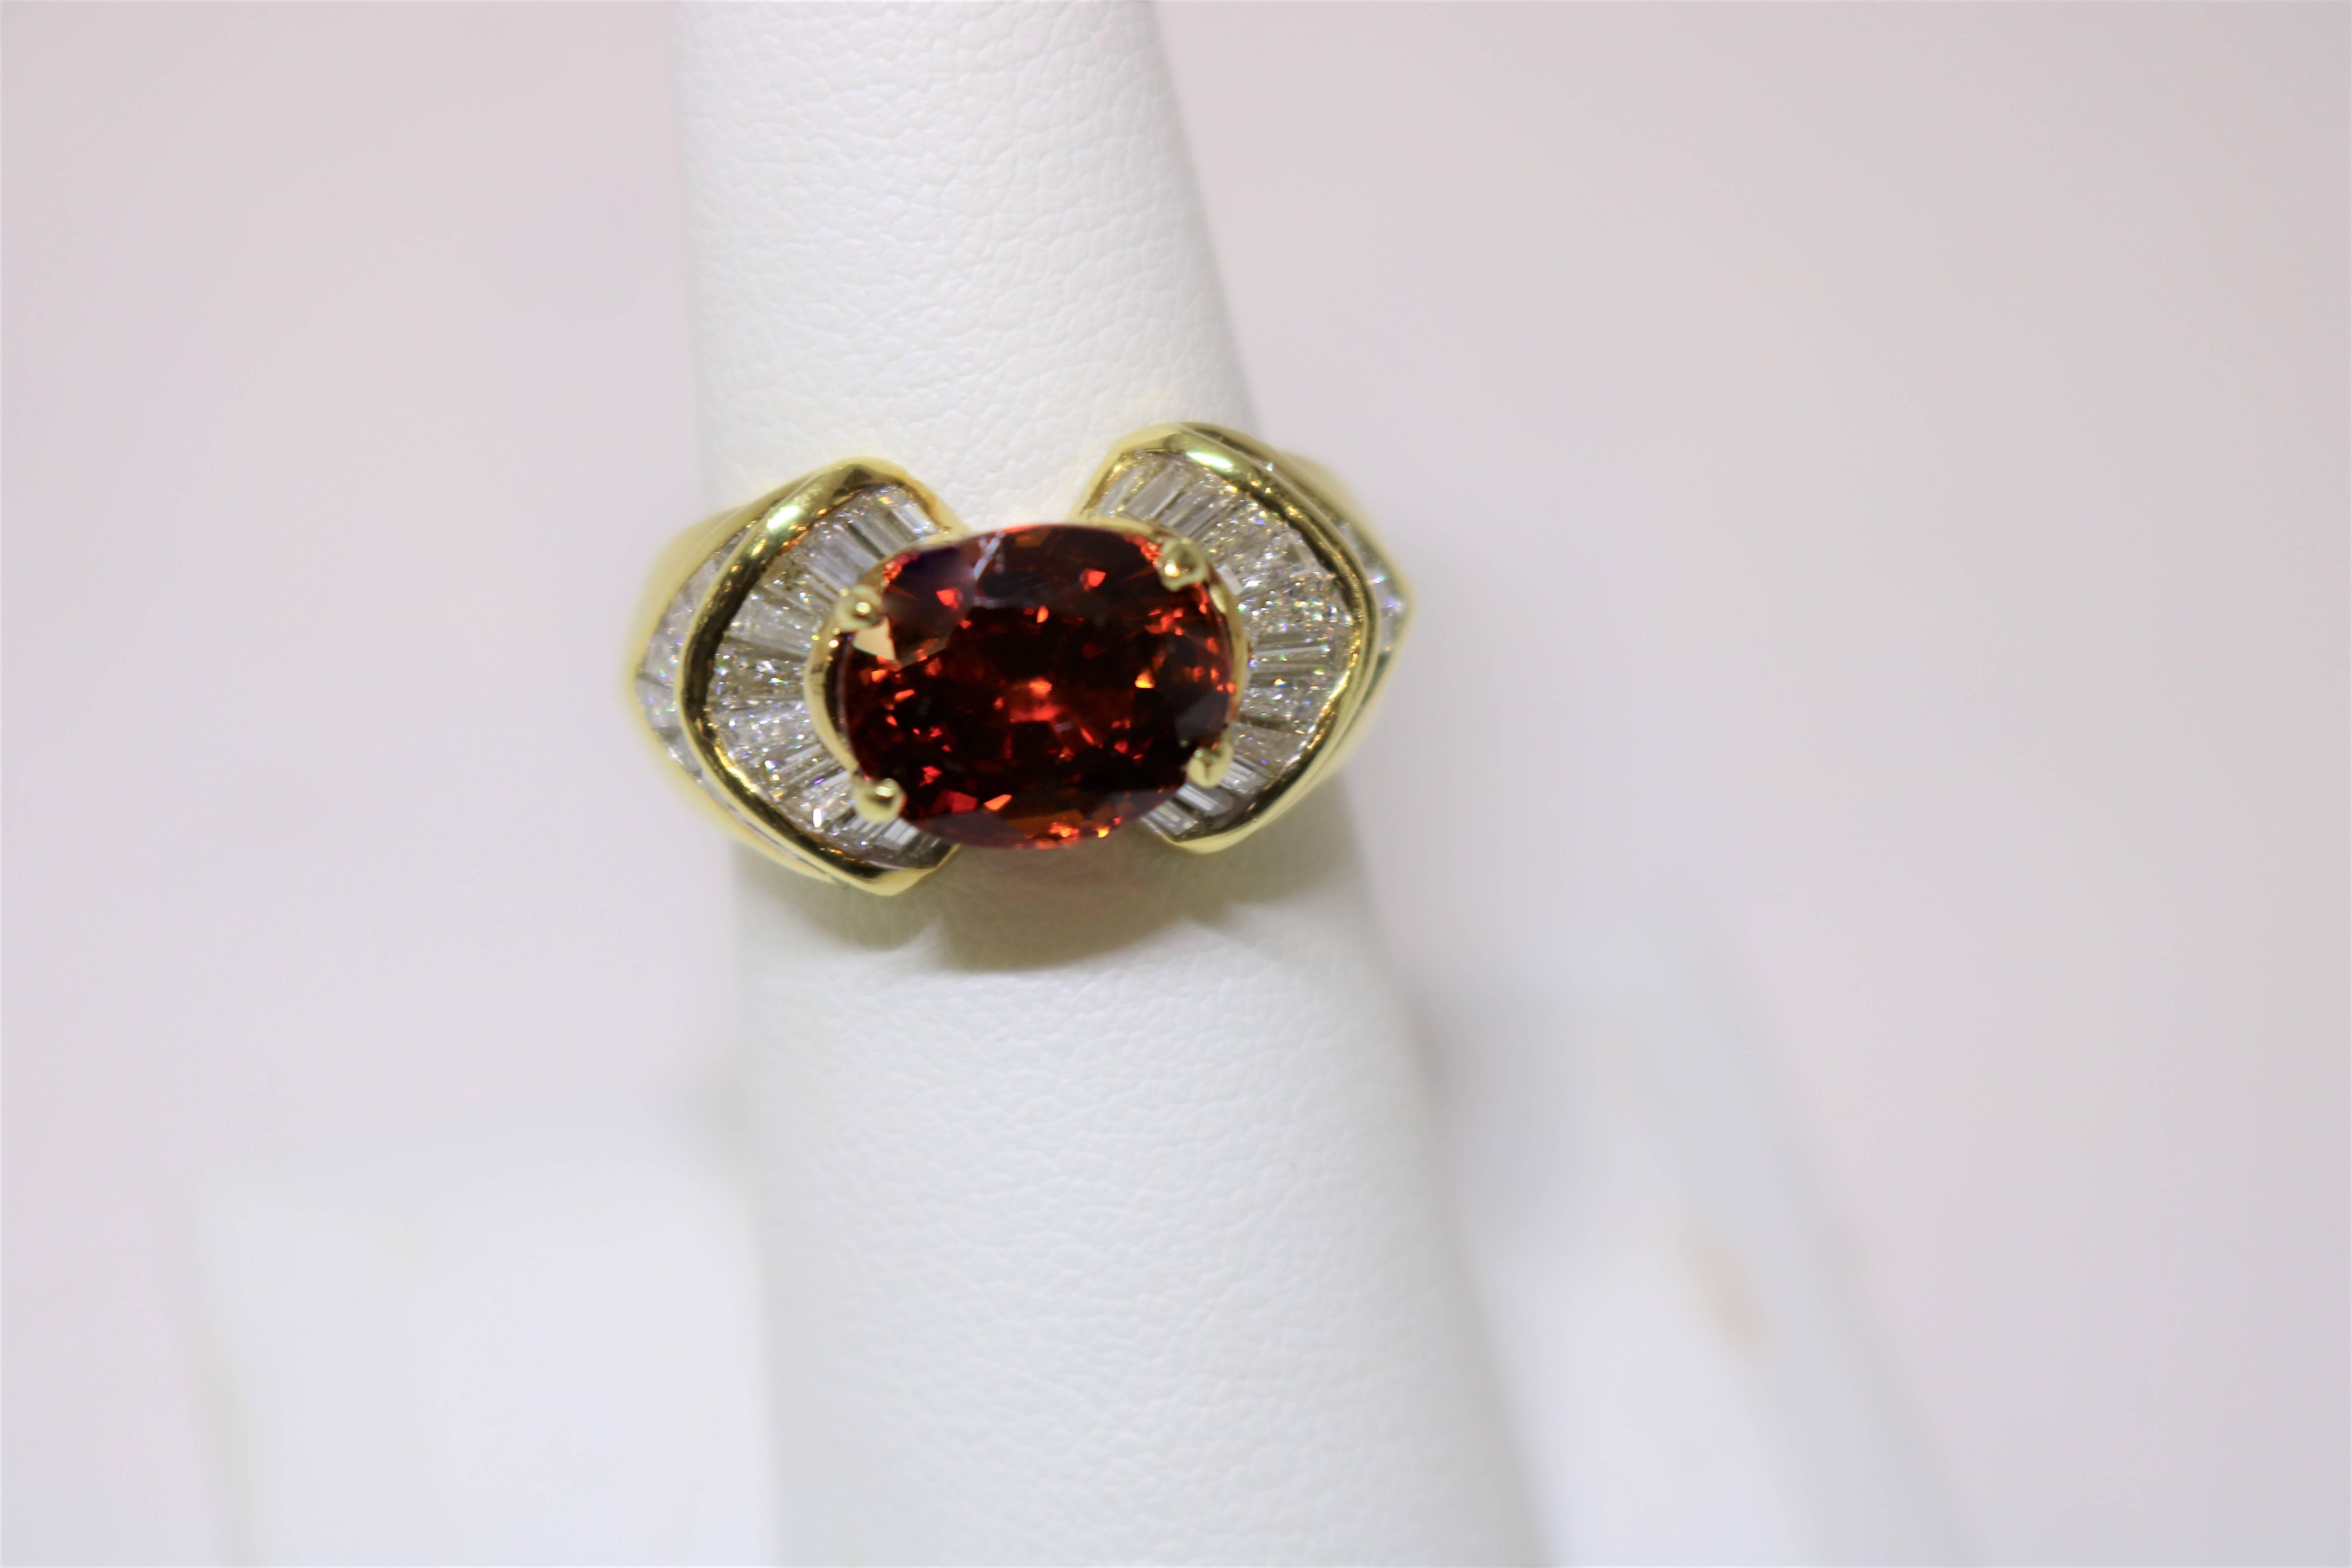 This exquisite evening ring is set in 18k Yellow Gold with 1.68 ct Diamonds surrounding the Spessartine Garnet weighing 4.85 cts. 
